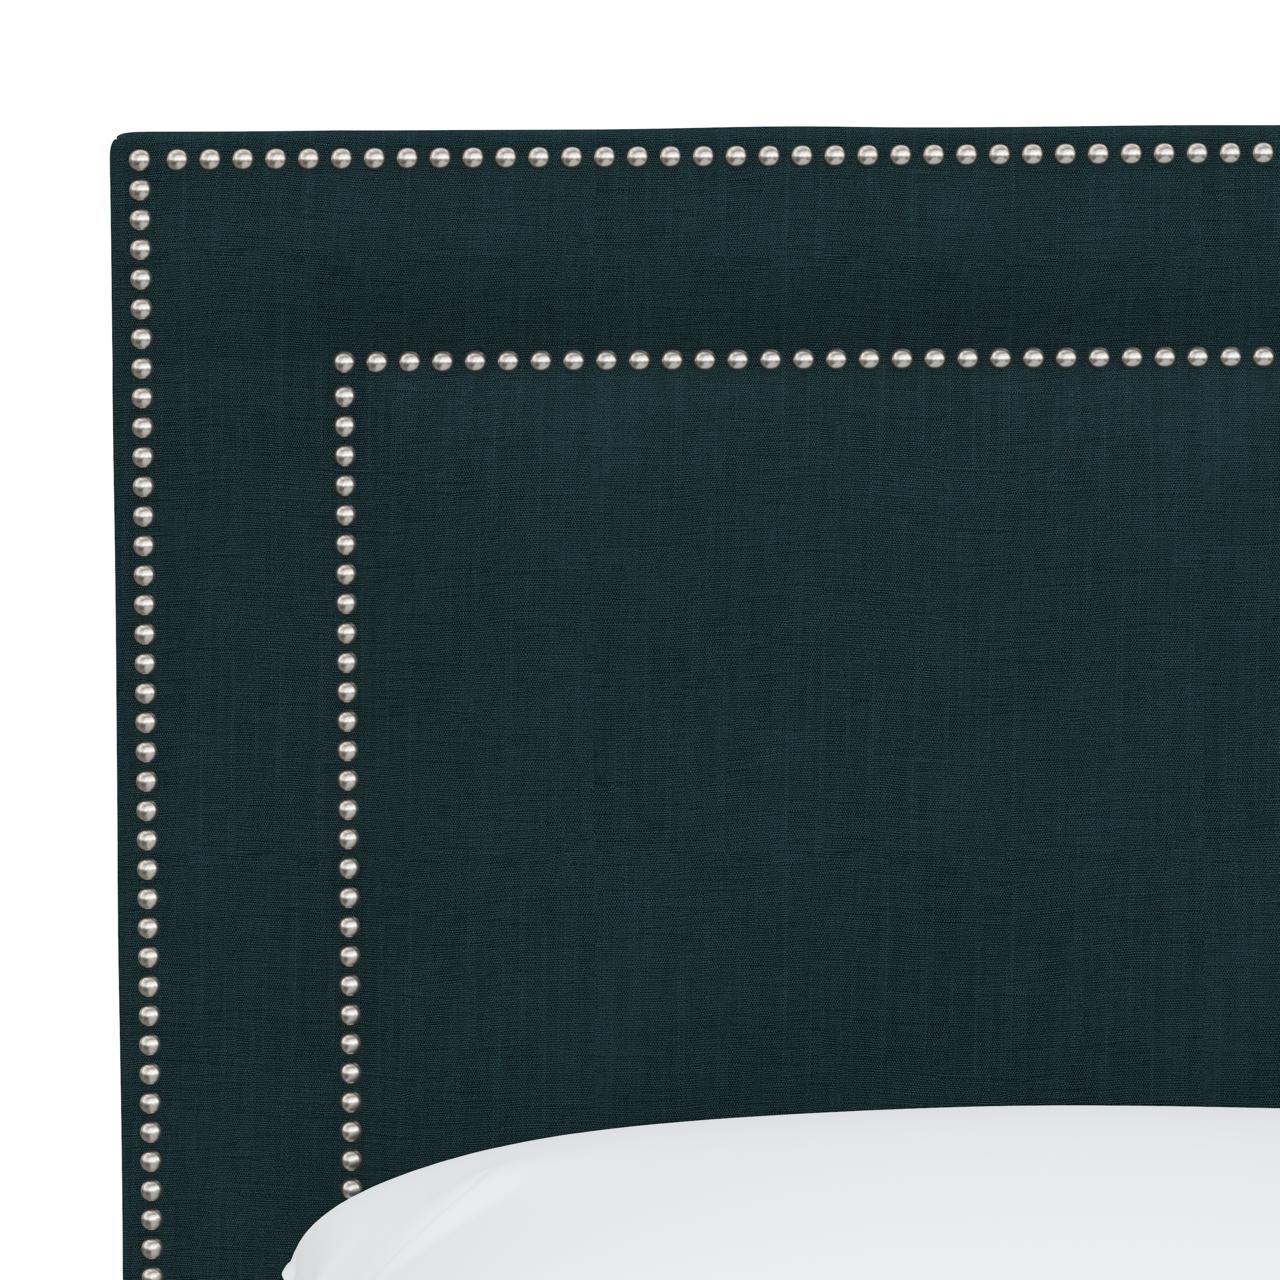 Williams Bed, Twin, Linen Conifer Green, Pewter Nailheads - Image 3